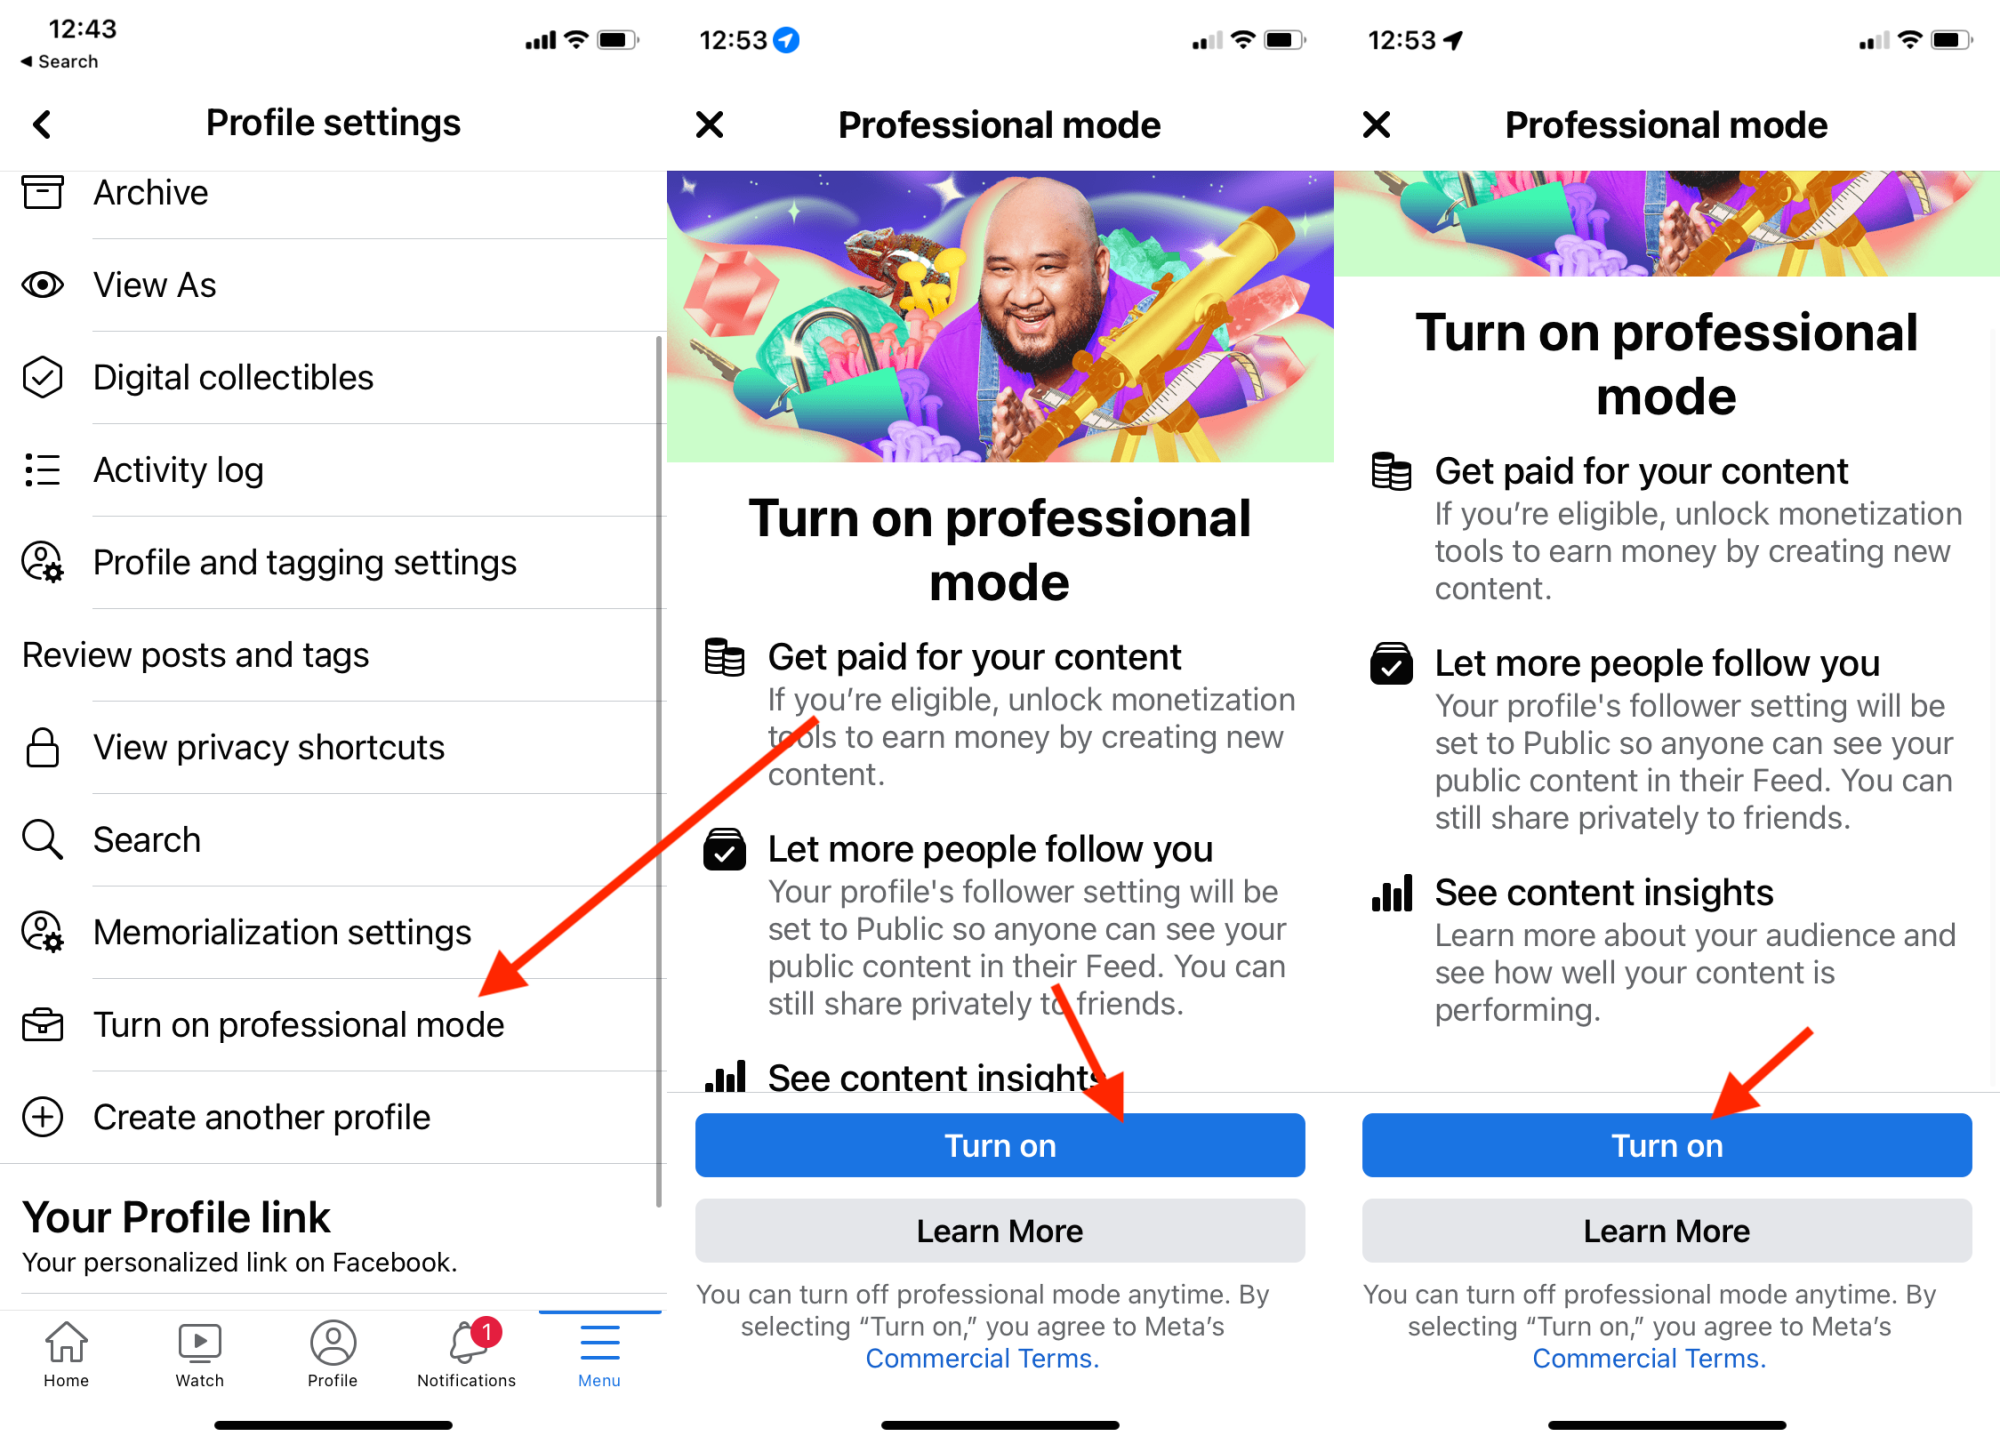 How to set up professional mode on your Facebook profile